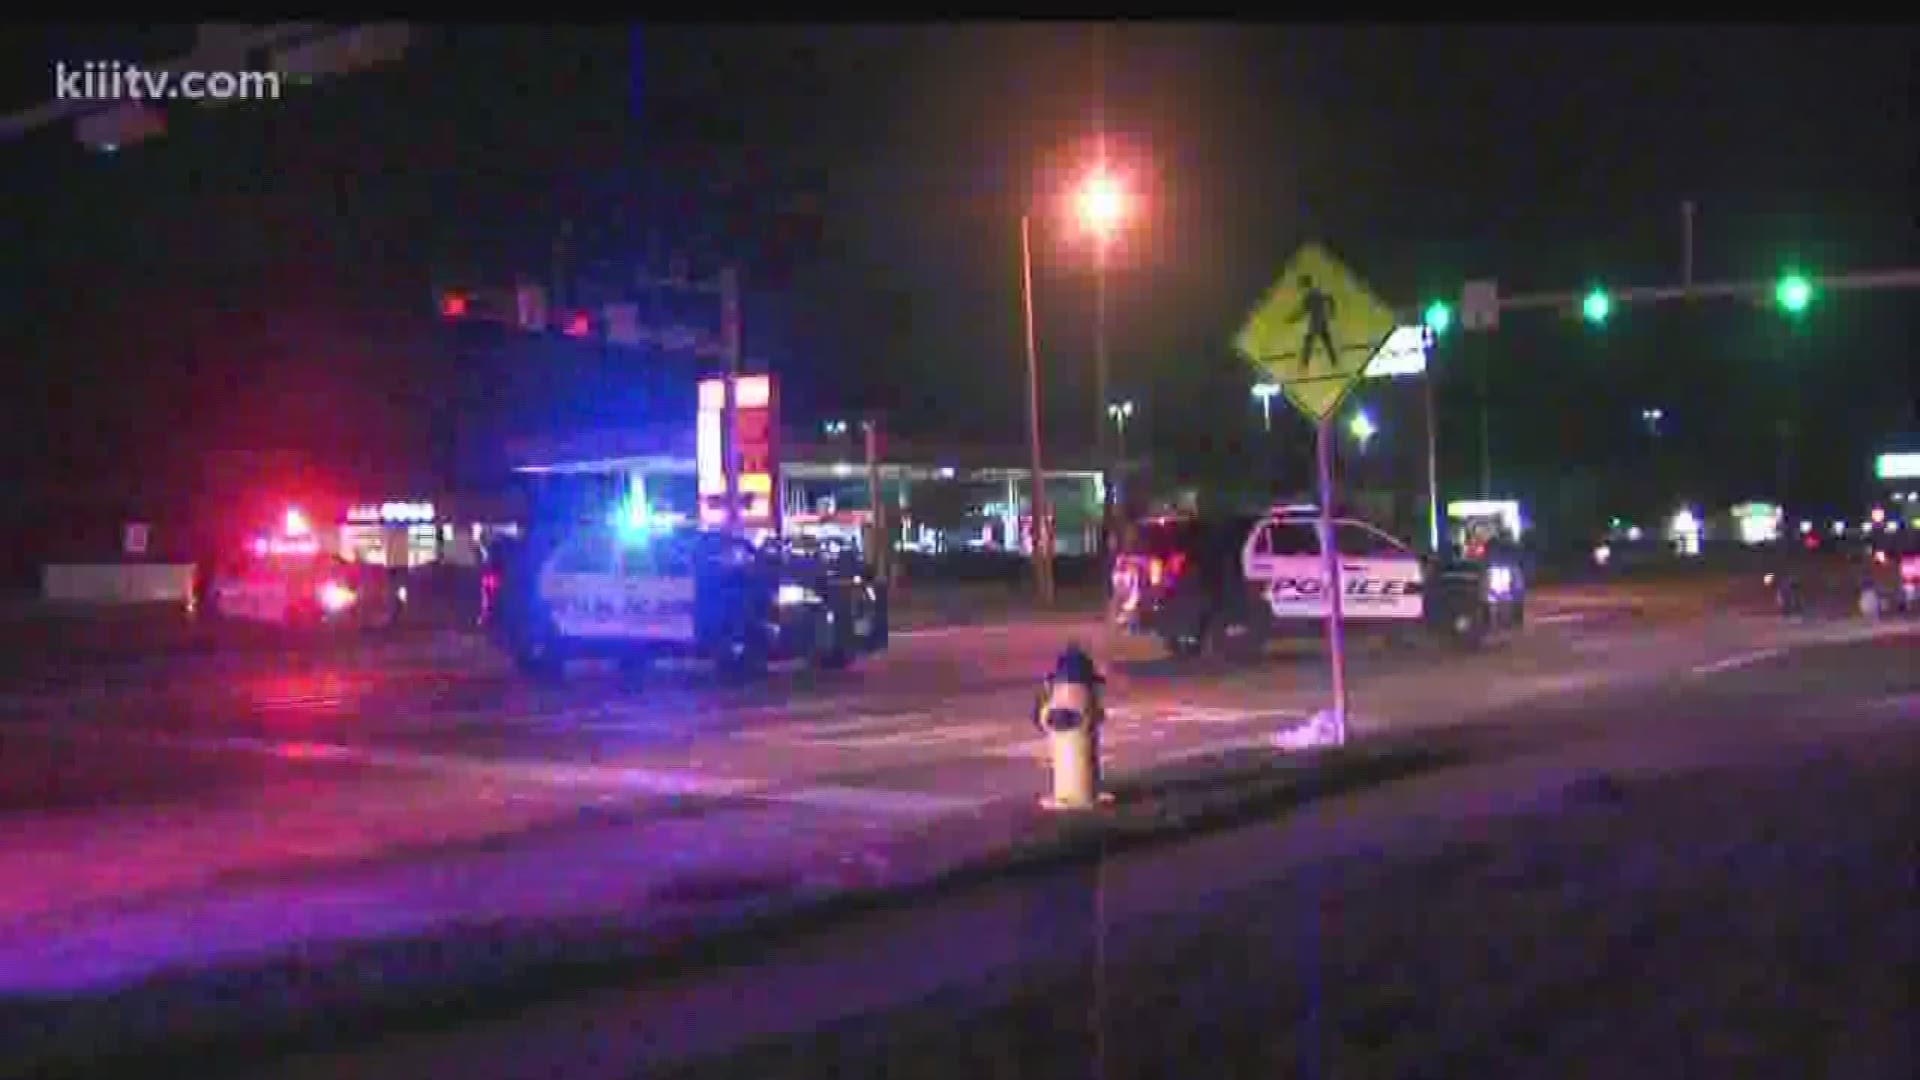 A man is fighting for his life Monday night after he was hit by a car in Flour Bluff near Waldron Road and Compton.